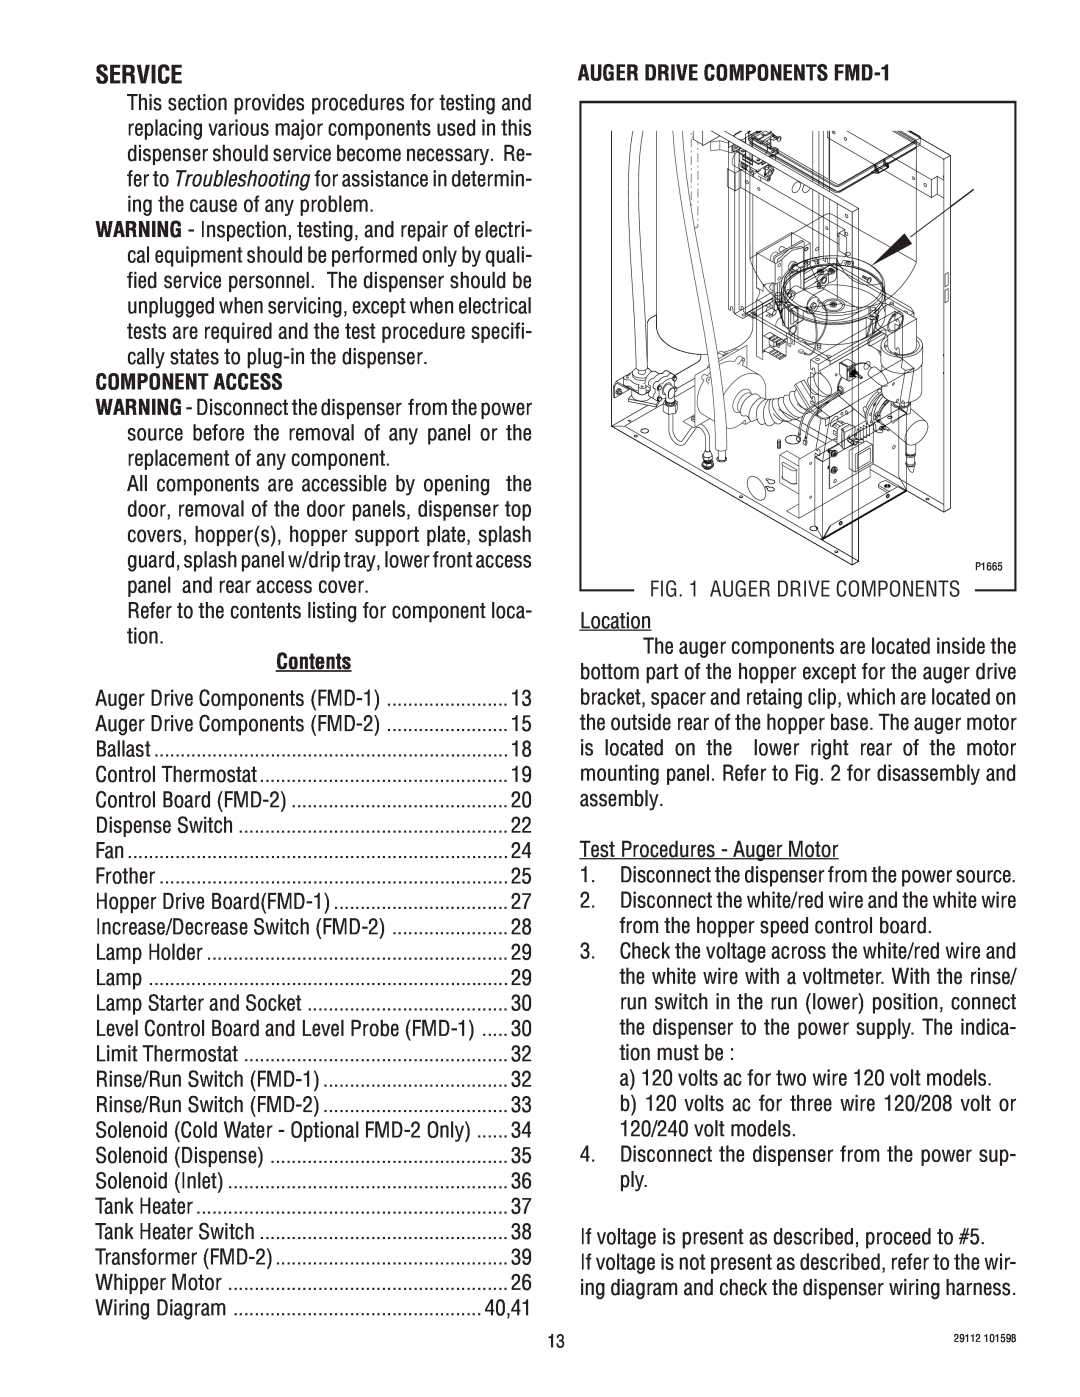 Bunn FMD-1 FMD-2 service manual Service, Component Access, Contents, AUGER DRIVE COMPONENTS FMD-1 